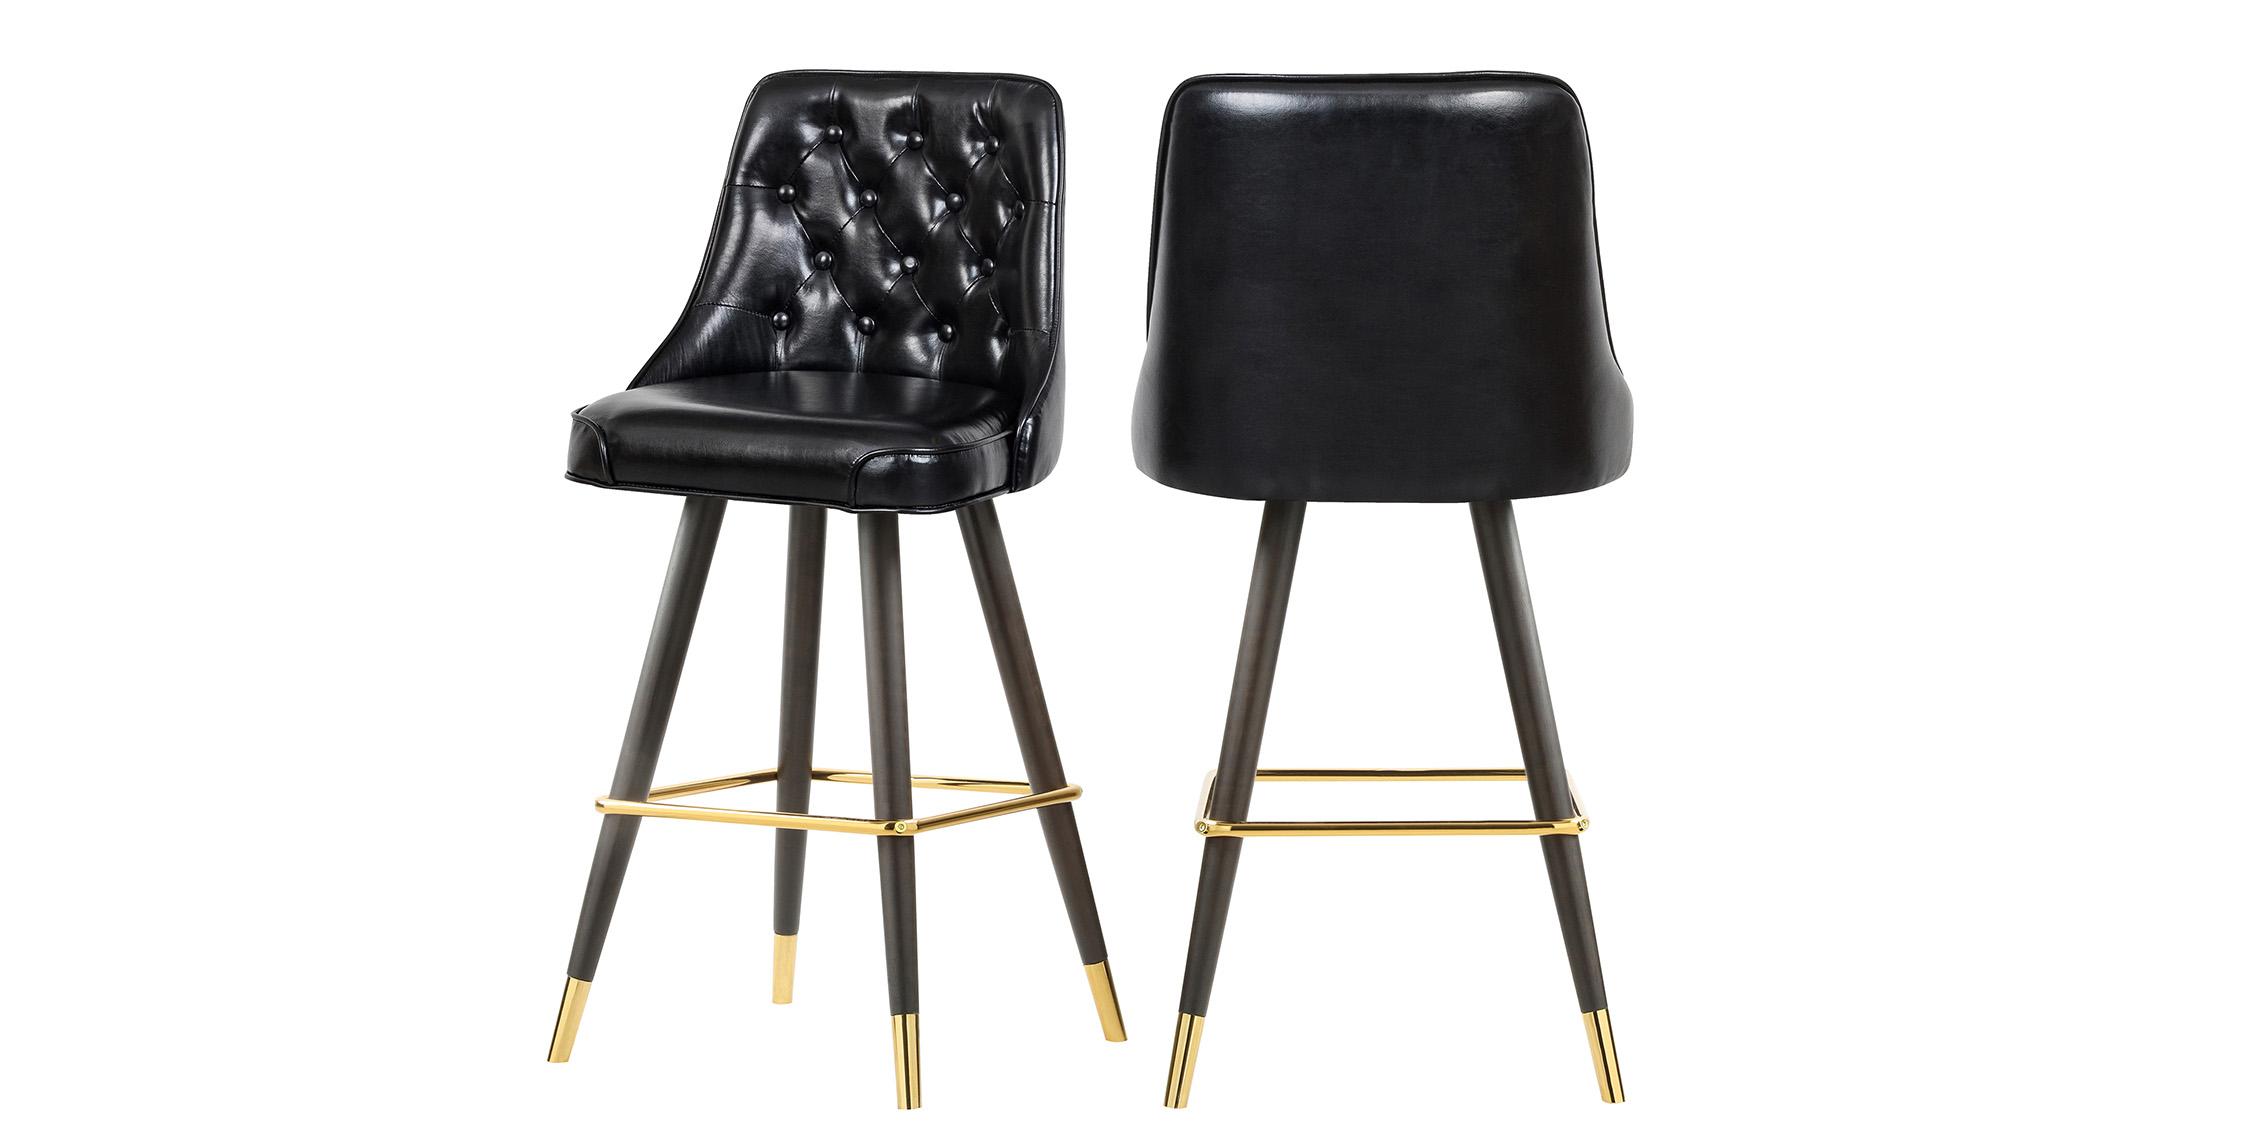 Contemporary, Modern Counter Stool Set PORTNOY 908Black-C 908Black-C in Black Faux Leather